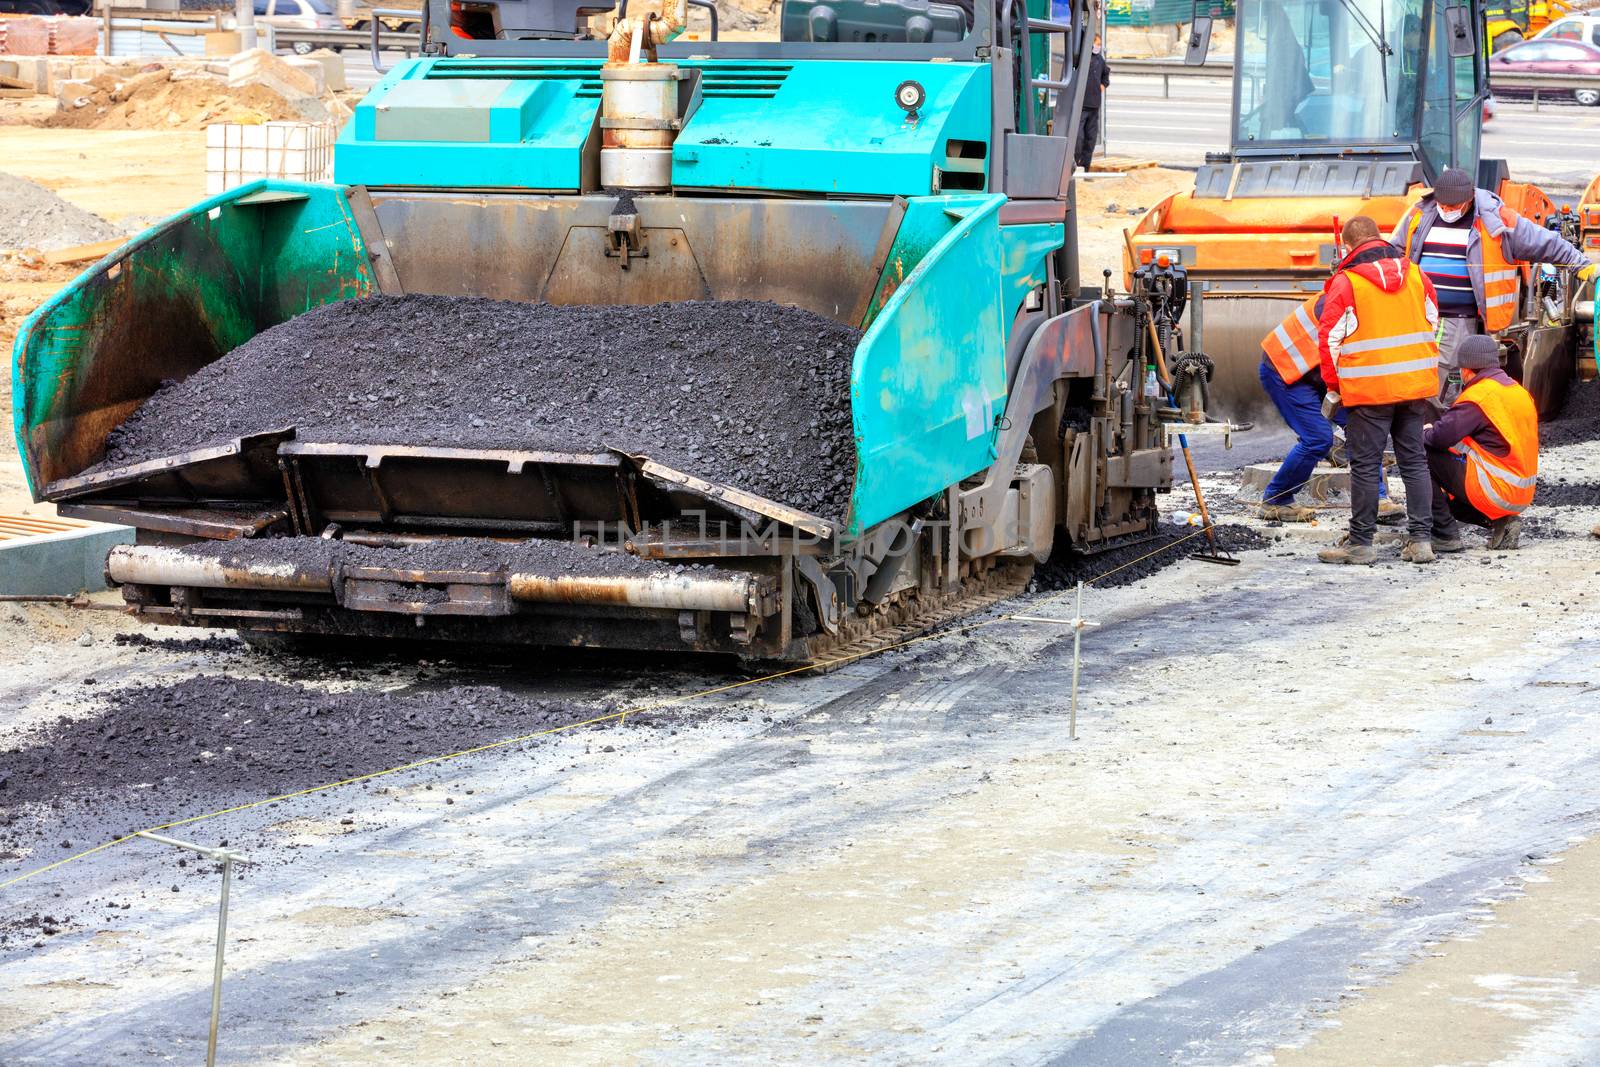 The large asphalt paver is filled with fresh asphalt in the foreground and the road vibratory roller is waiting for the construction of a new asphalt road, copy space.